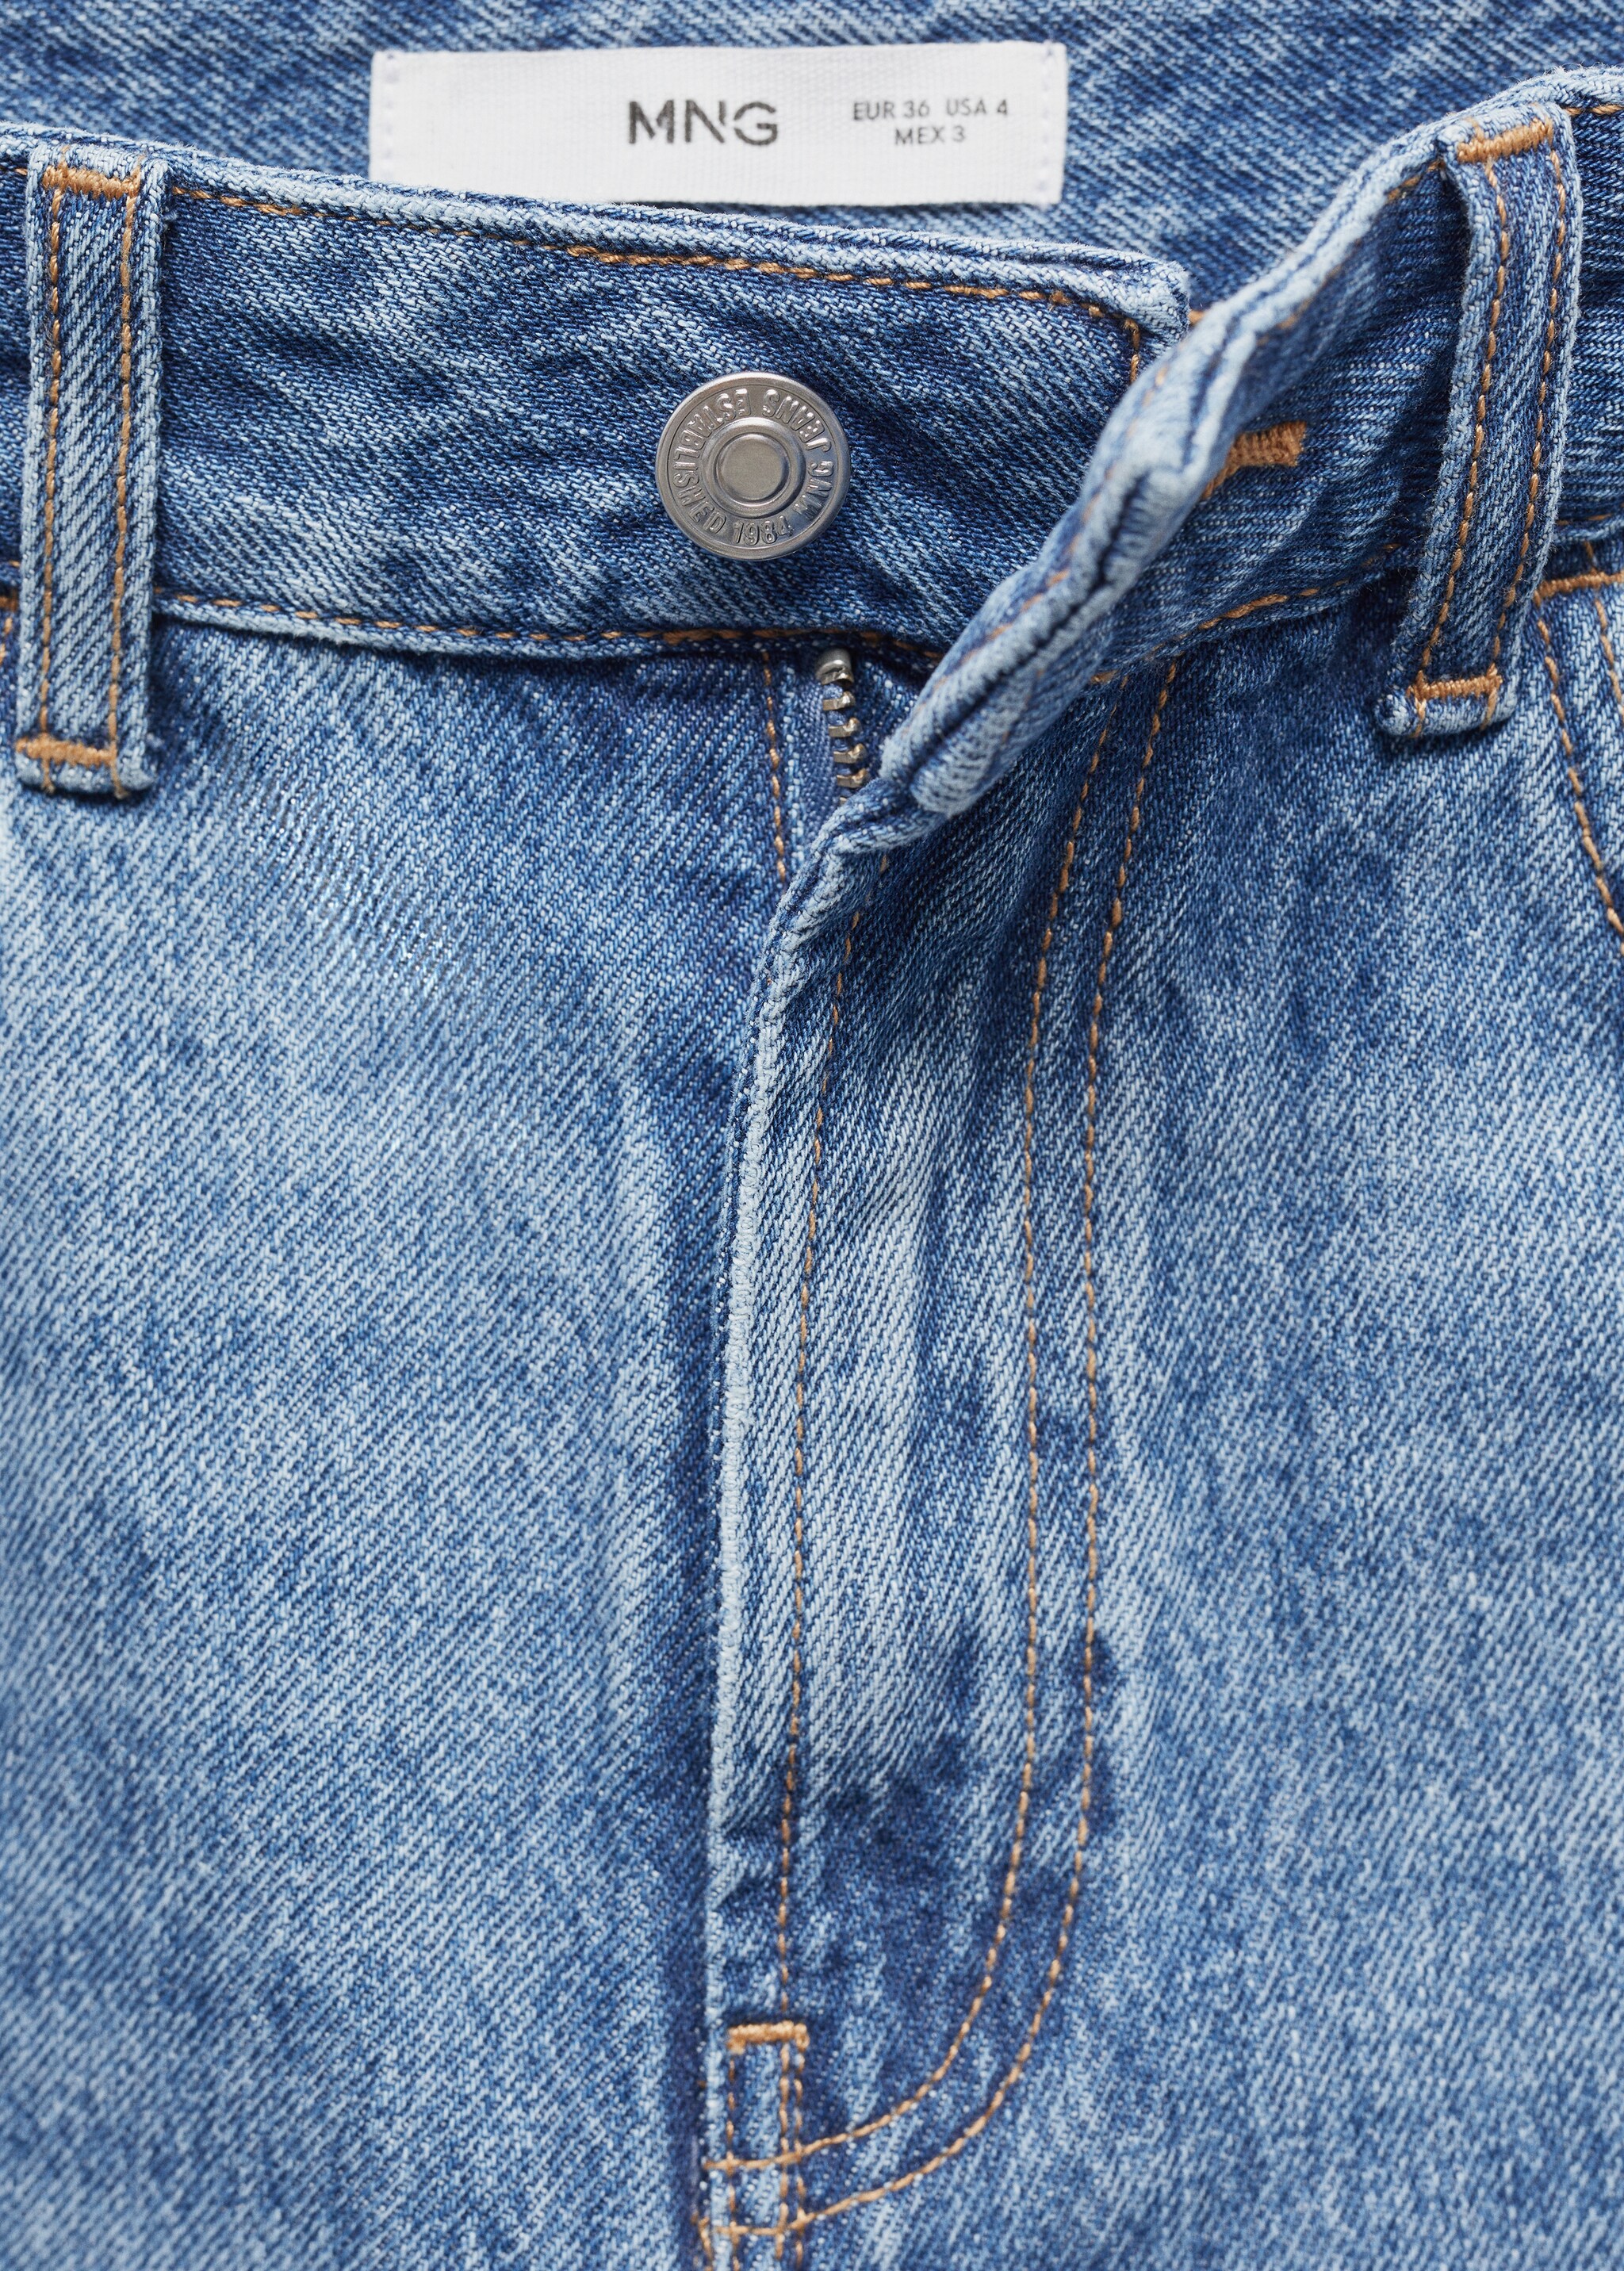 Denim bermuda shorts with frayed hem - Details of the article 8